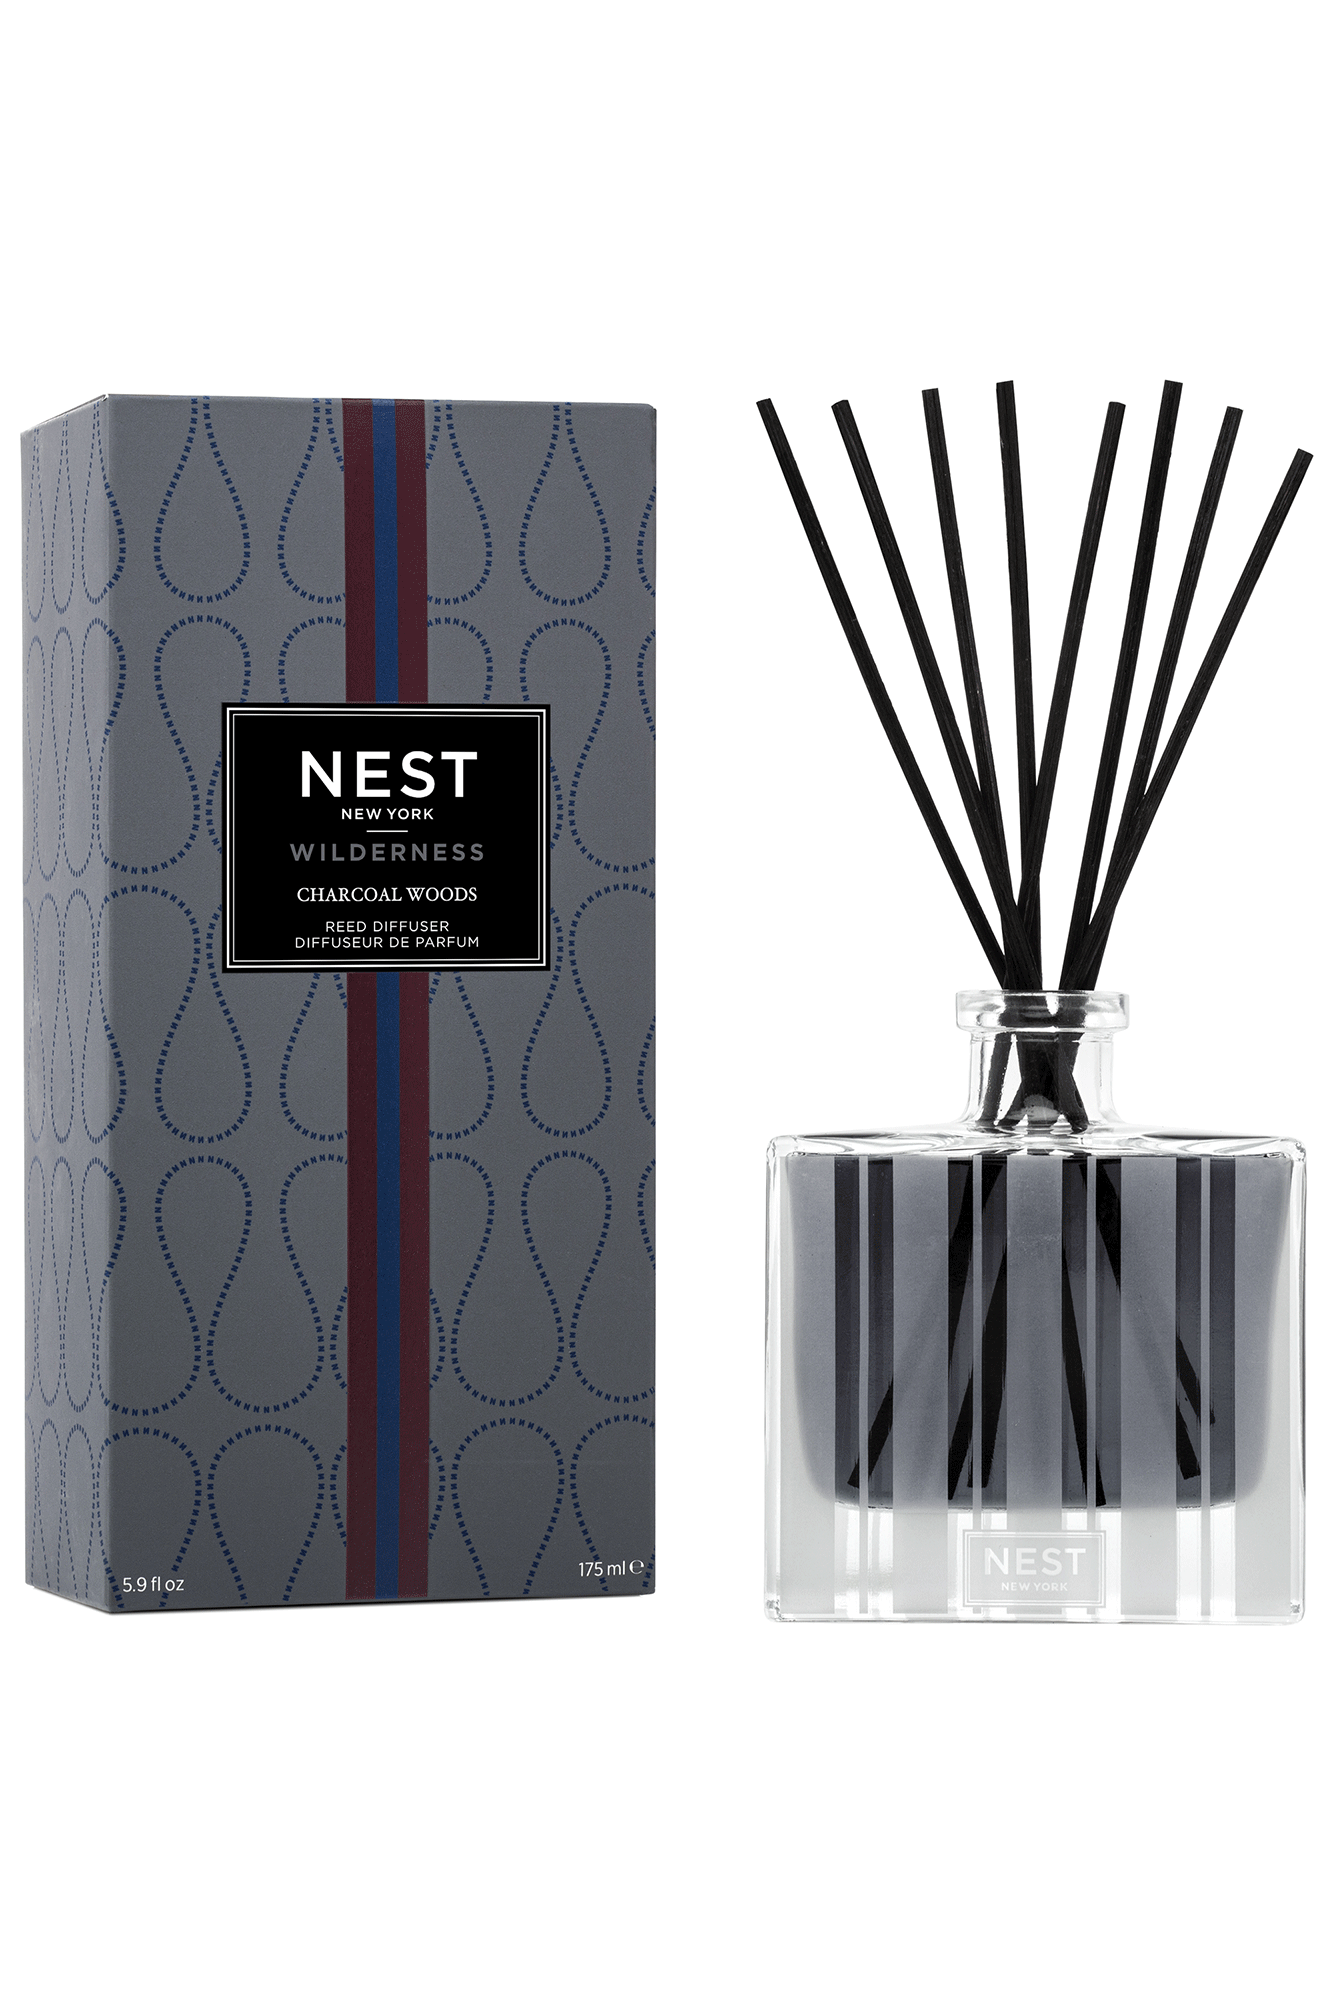 This Charcoal Woods Reed Diffuser from Nest has a unique smoky scent. Experience notes of labdanum, patchouli, and cedarwood mingling with charred birchwood and a subtle hint of black truffle. Create a mysterious forest atmosphere in any space.